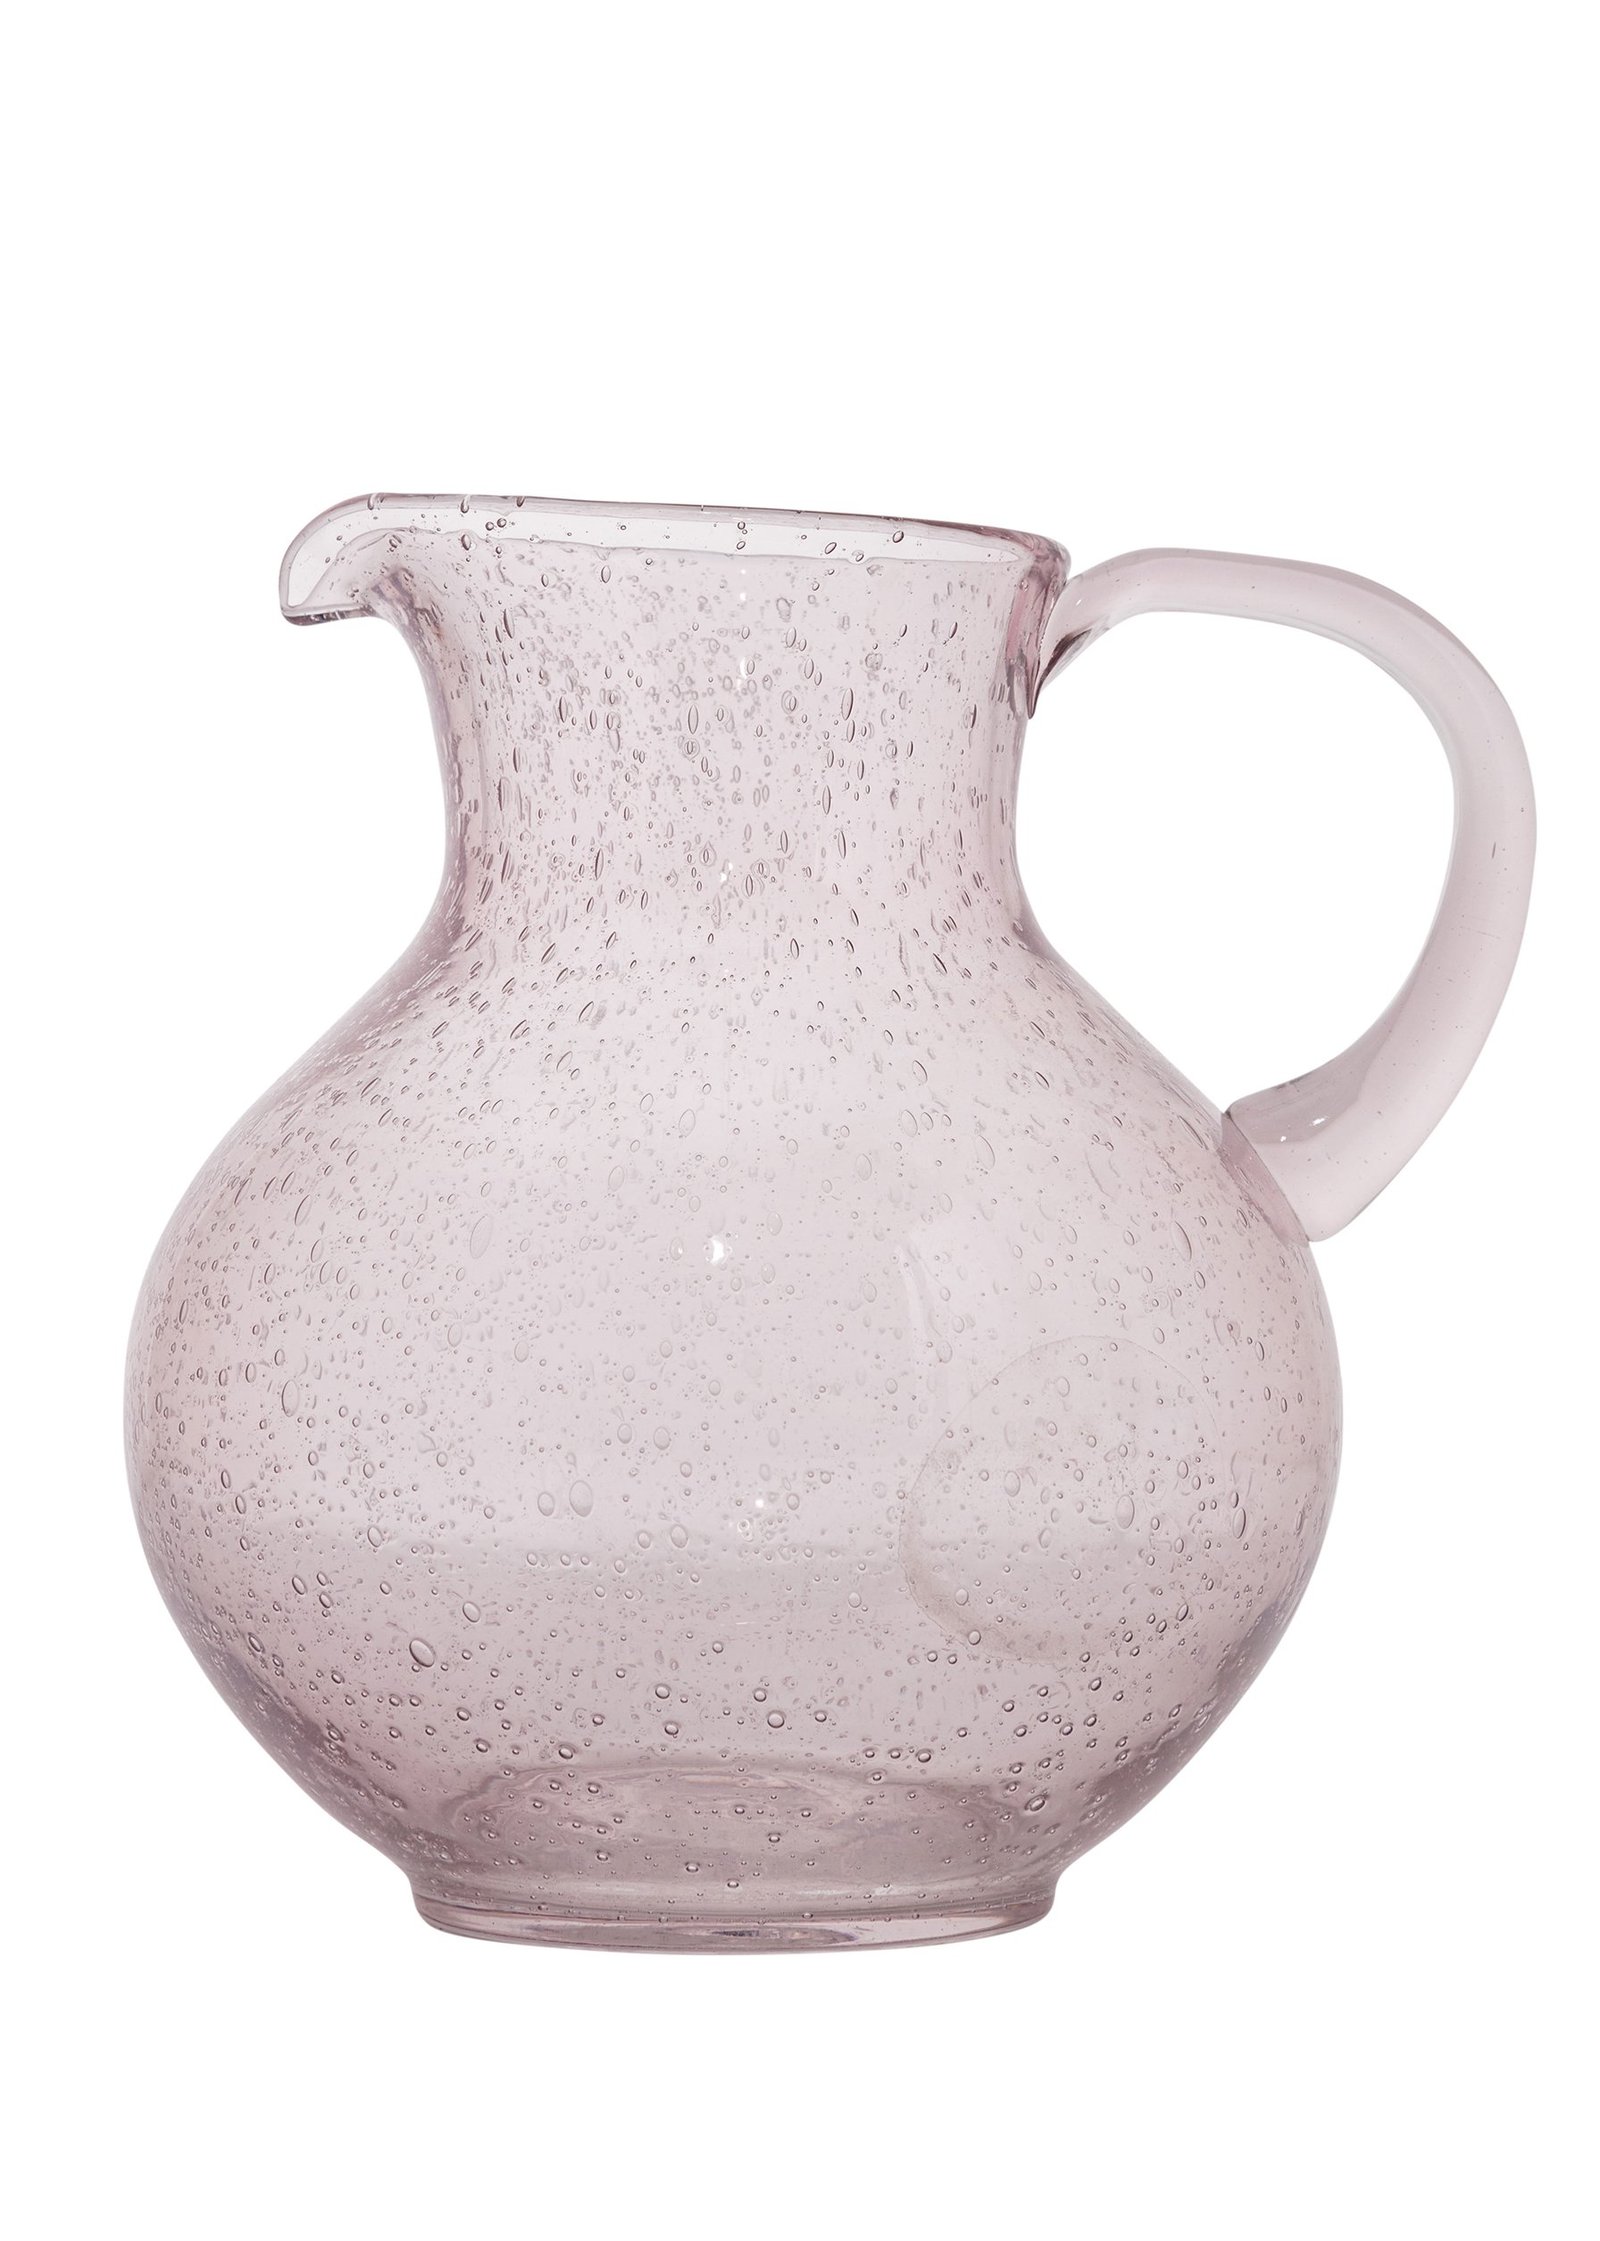 Glass carafe with bubbles